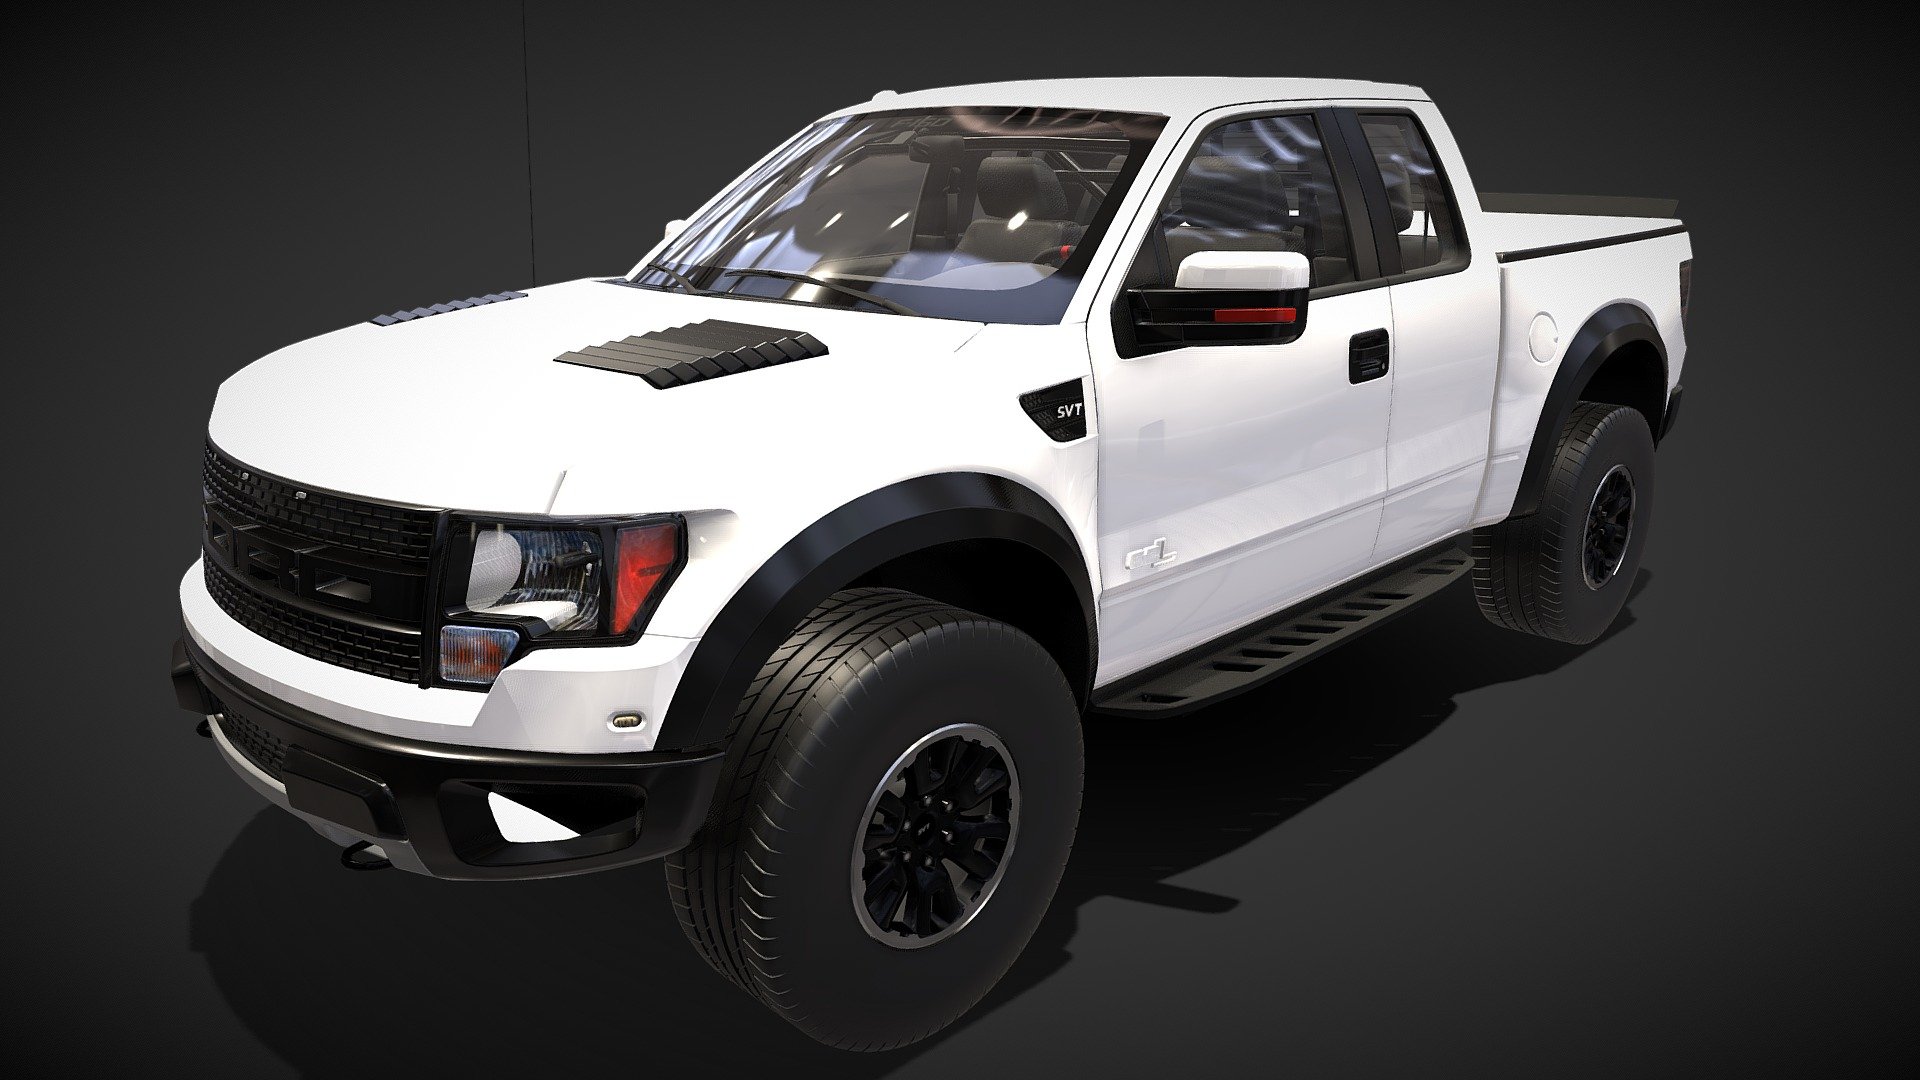 This highly detailed model features accurate dimensions and proportions, making it perfect for a wide range of projects, including games, animations, and architectural visualization. All materials are included, so you can start using the model in your favorite game engine right away.

Features:
Fully PBR textured
Accurate dimensions and proportions
All materials included
Ready to use in your favorite game engine

Get your Ford Raptor F-150 3D model today and start creating! - Ford Raptor F150 - 3D model by gregoryvisuals 3d model